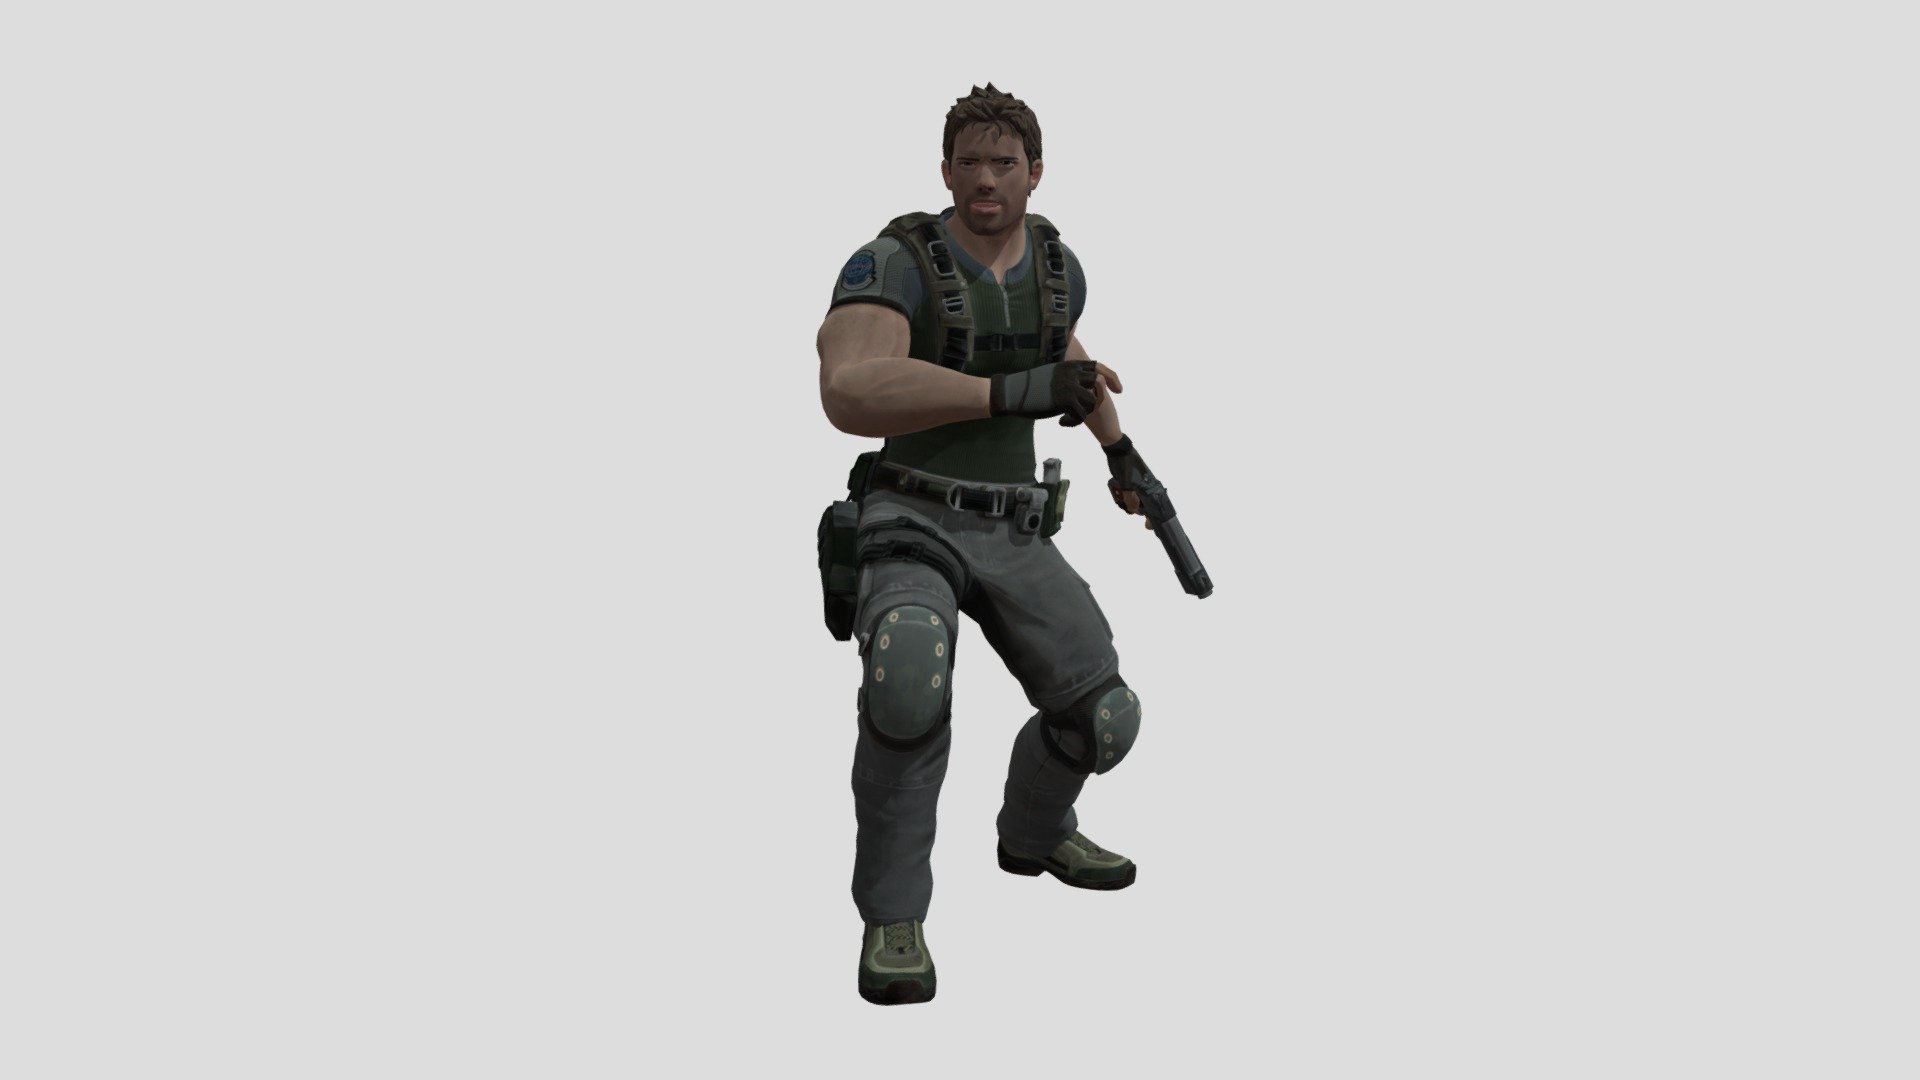 Ready to animate in blender Full rig with facial controls including teeths and tongue with accesories attach to model like the holster and bags, made in blender with riggify and using the model of malakisuglypotato https://www.deviantart.com/malakisuglypotato/art/XPS-Fortnite-Resident-Evil-Model-Pack-2-Download-955914805 and the gun made by Whitend https://sketchfab.com/3d-models/fortnite-pistol-39f9b772c8514dfc8ec304bf5c85ceda
i never saw a chris redfield model with a good riging so here it is, completly ready to play with it.
if a see a good amount of likes and comments i will upload it so everyone can download the model with the advanced rig (I will upload it without the gun so the weight of the file and the amount of vertex will be less than this)
going to upload some fornite model i will use in my upcoming study project about the geekverse so follow to get all the rigged characters - Fortnite Chris Redfield (ADVANCED RIG) - 3D model by northsideanimation 3d model